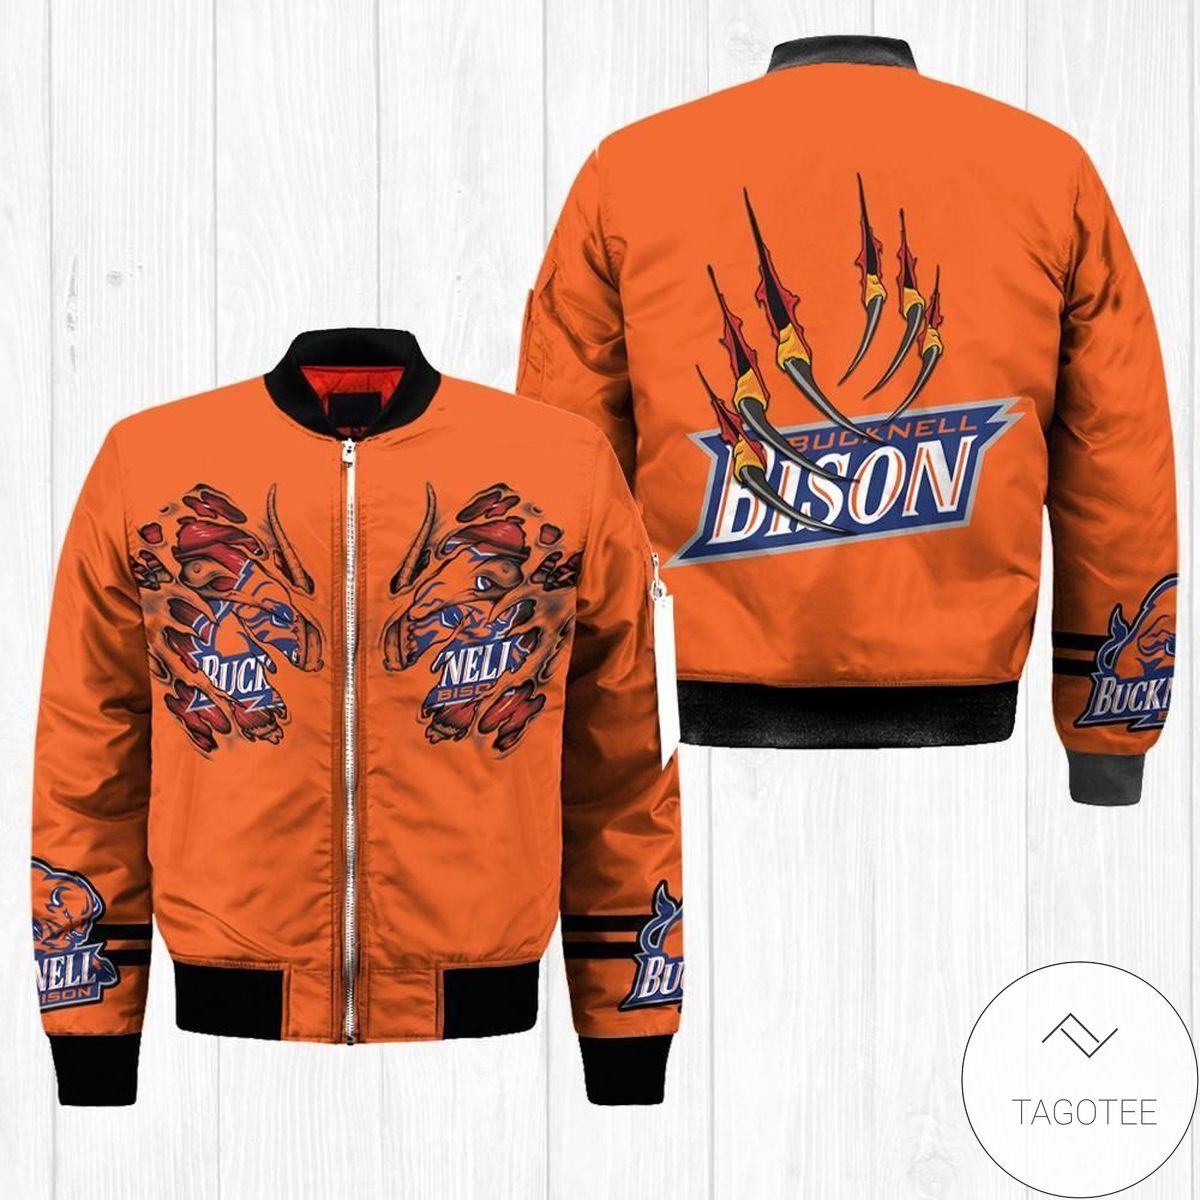 Bucknell Bison Claws 3d Printed Unisex Bomber Jacket